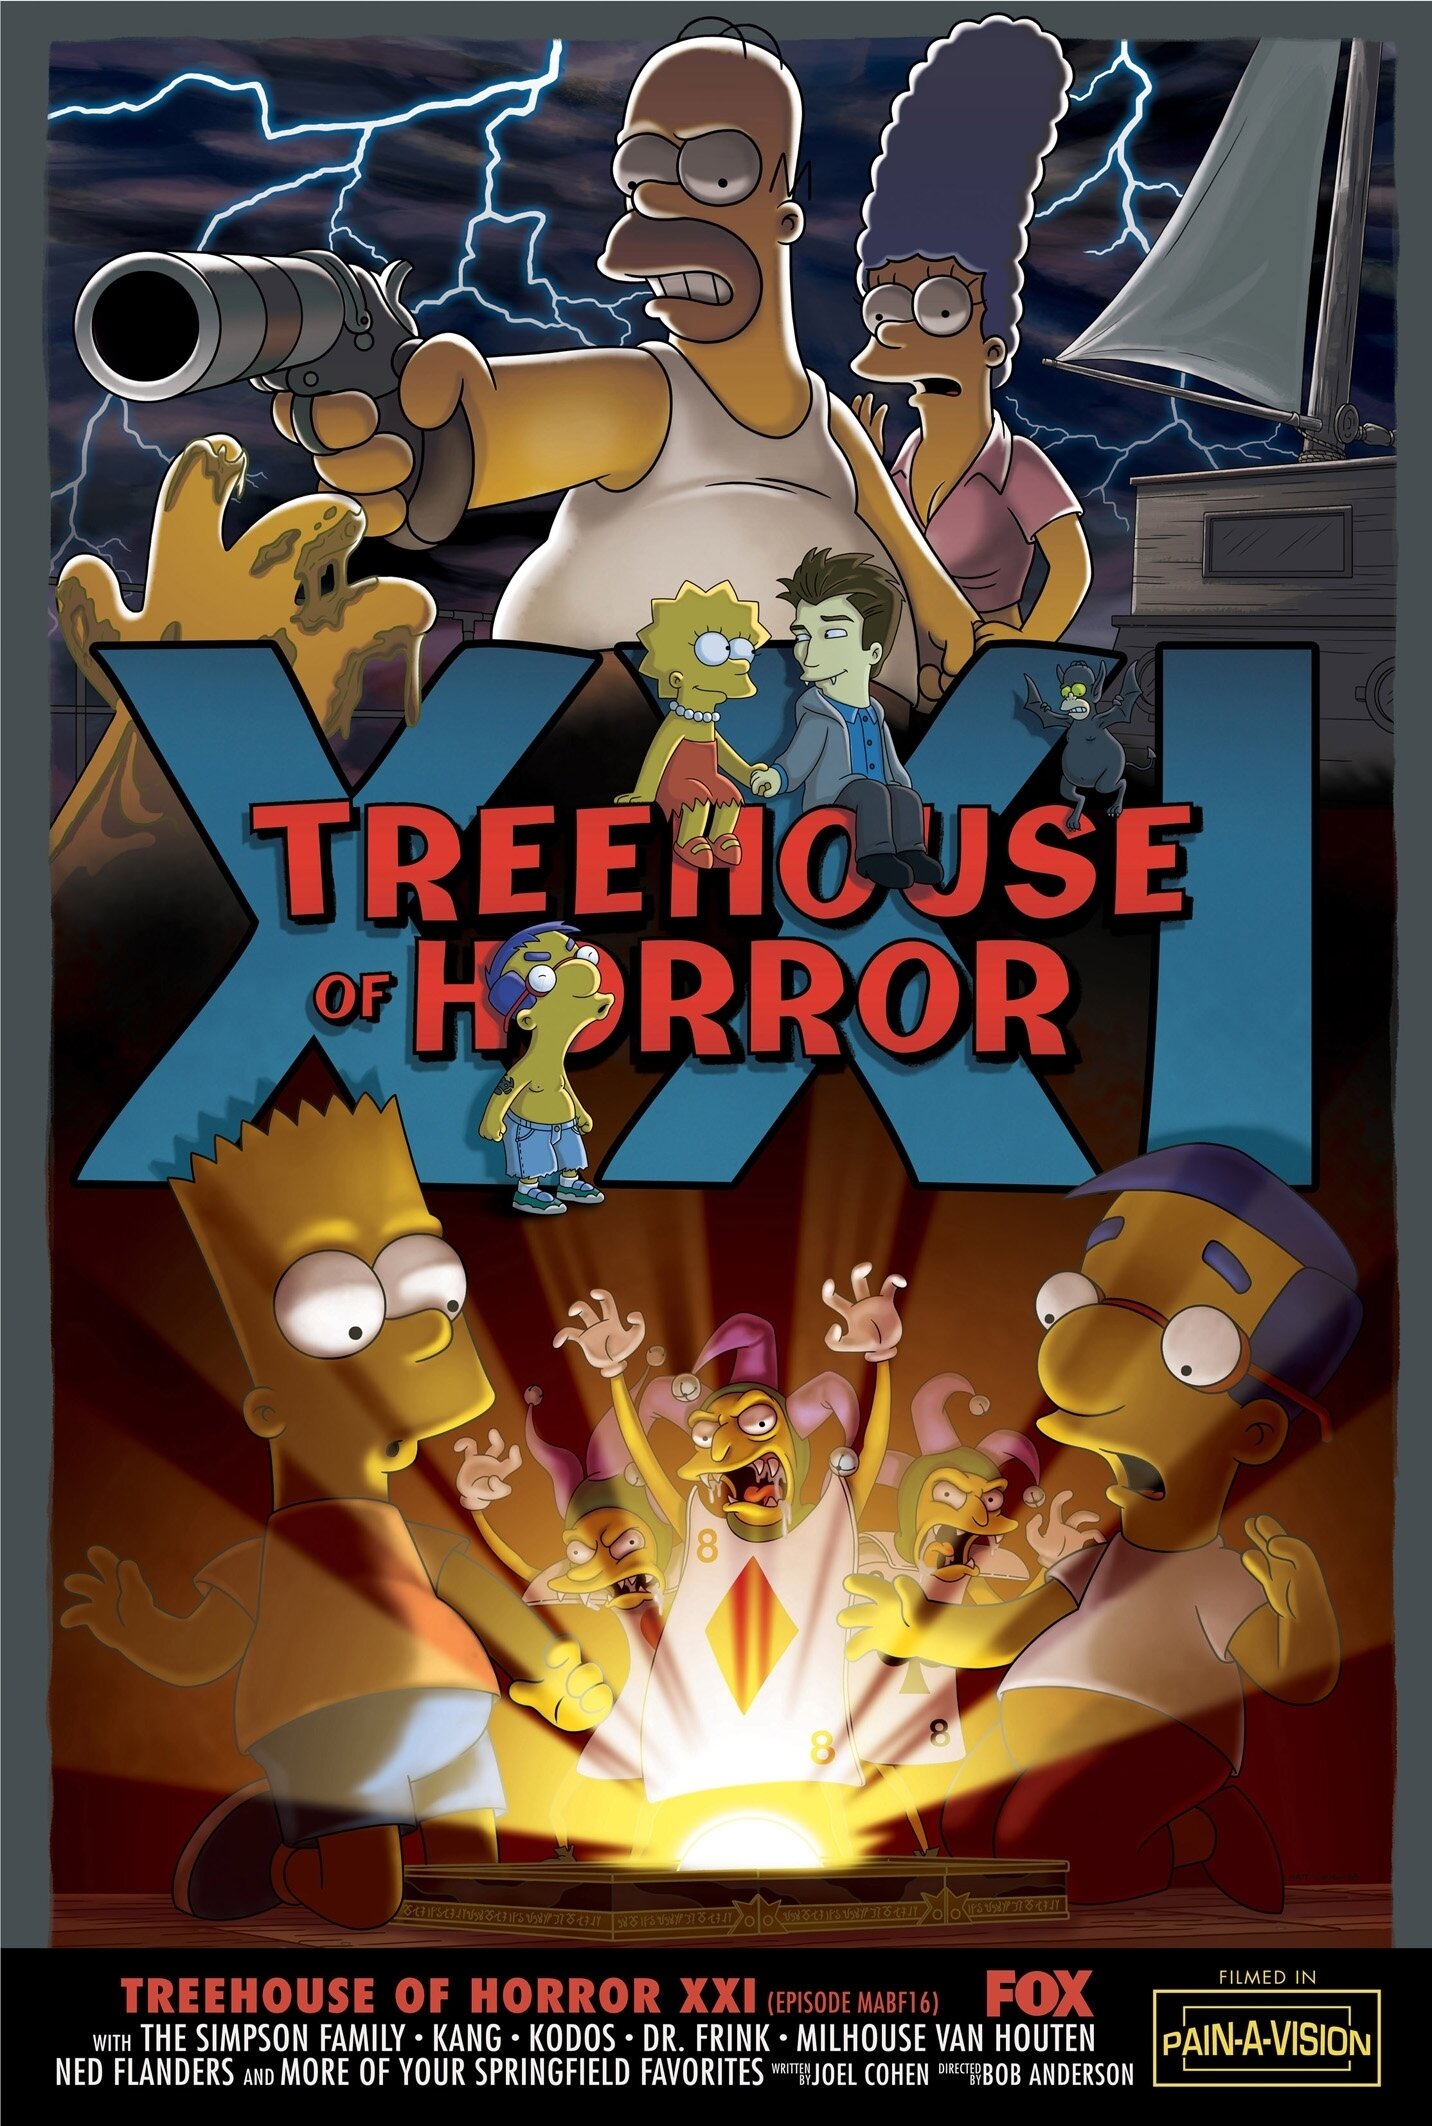 The Simpsons - Treehouse of Horror XXI